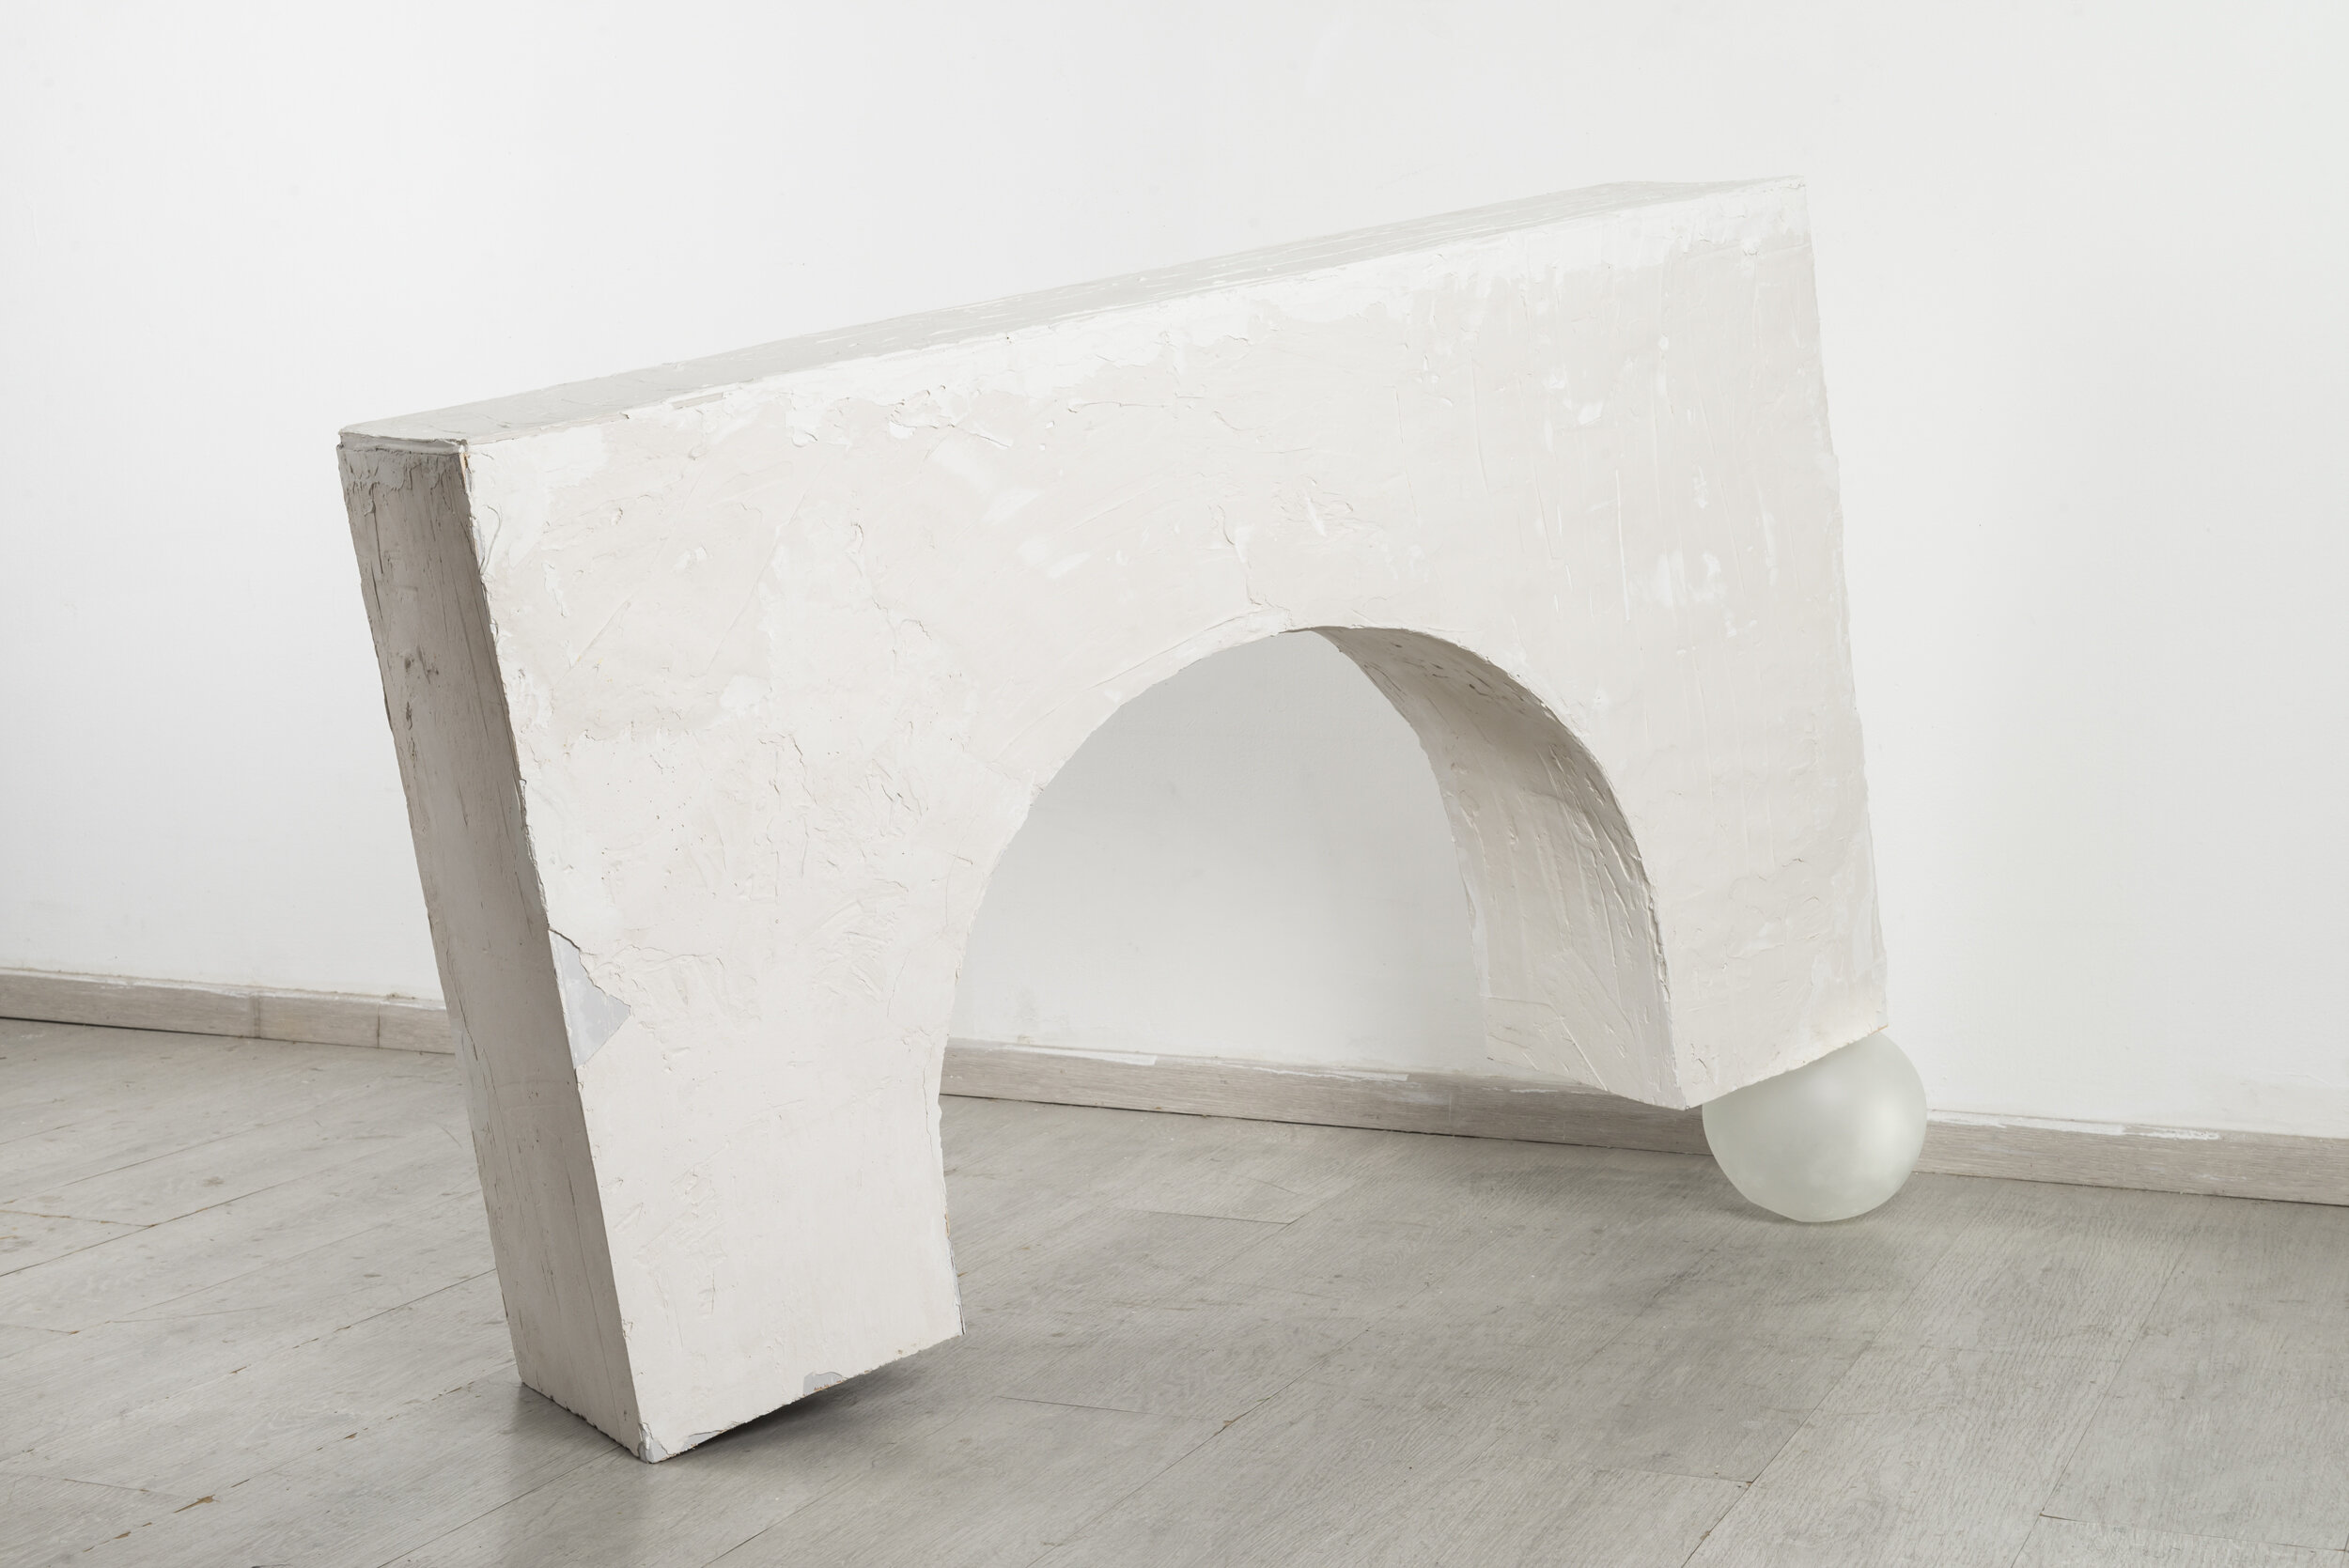 Balance games, installation - plaster, wood and glass, 120x94x25, 2019. Photo credit: Doron Oved